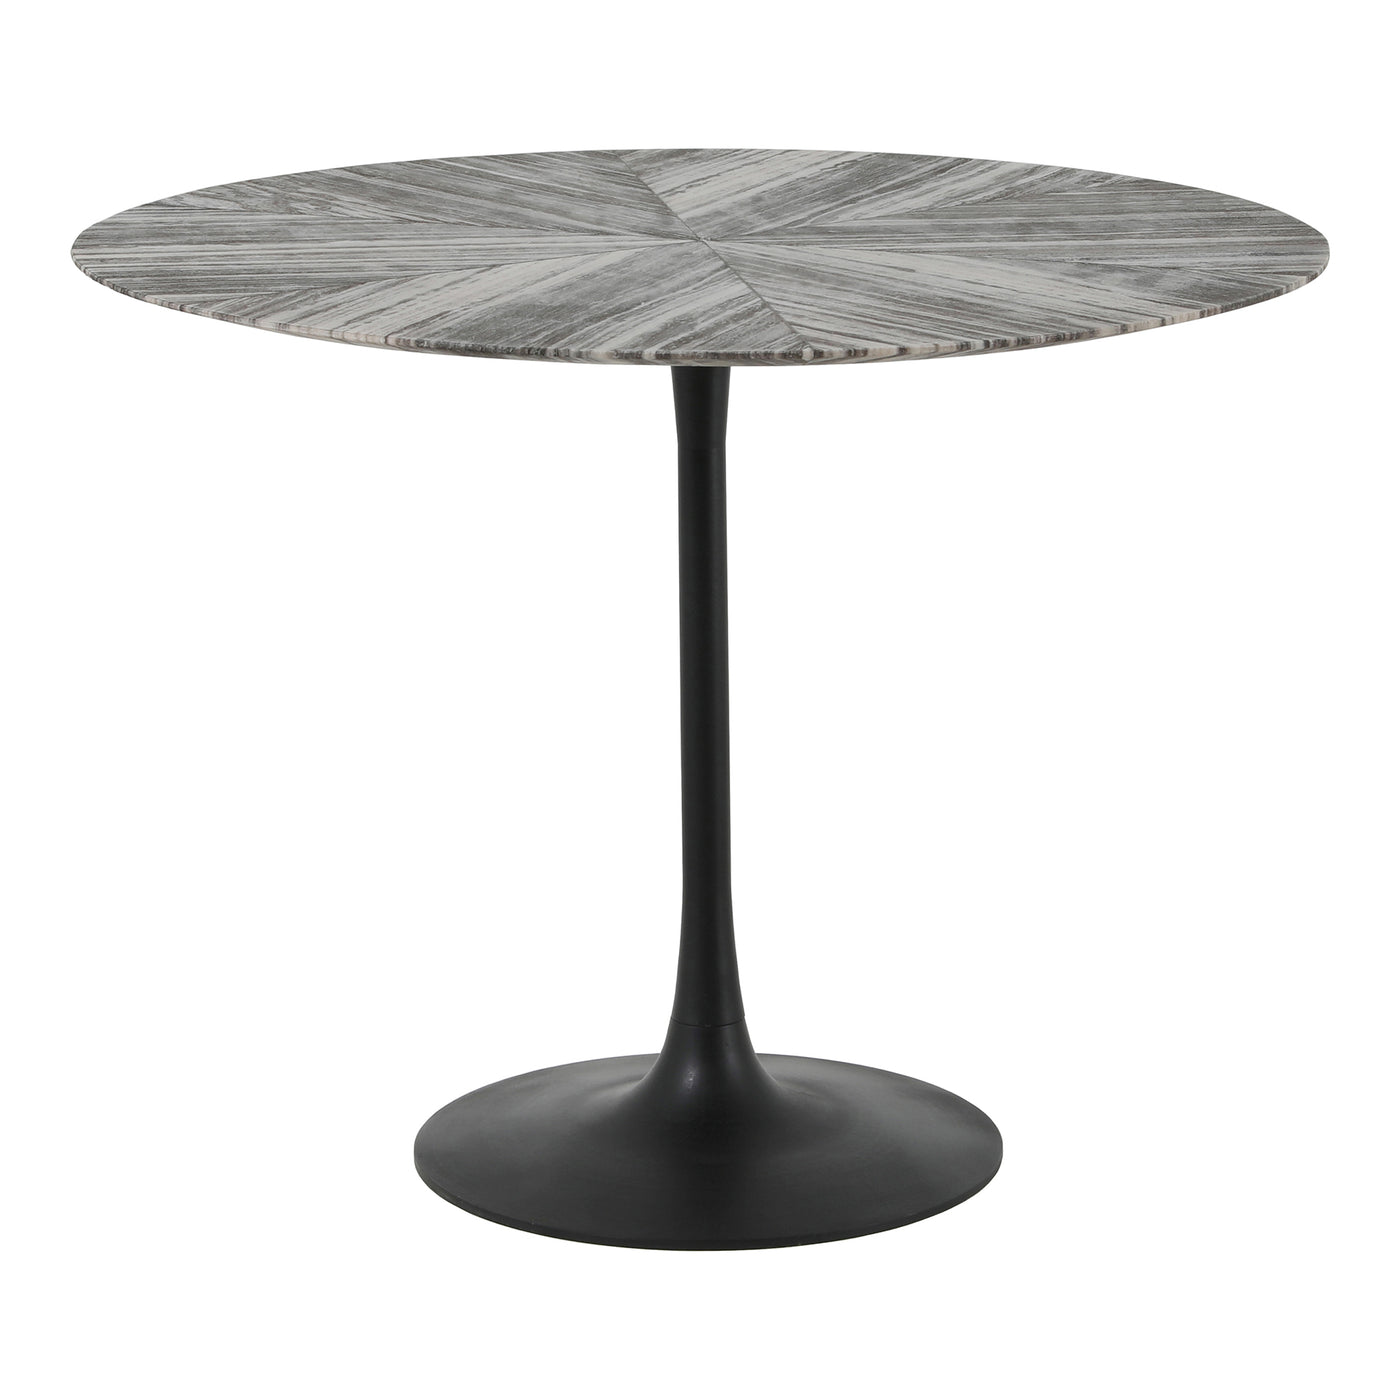 It's all about the details. The Nyles Dining Table's marble table top is complemented by an iron pedestal base. A classic ...